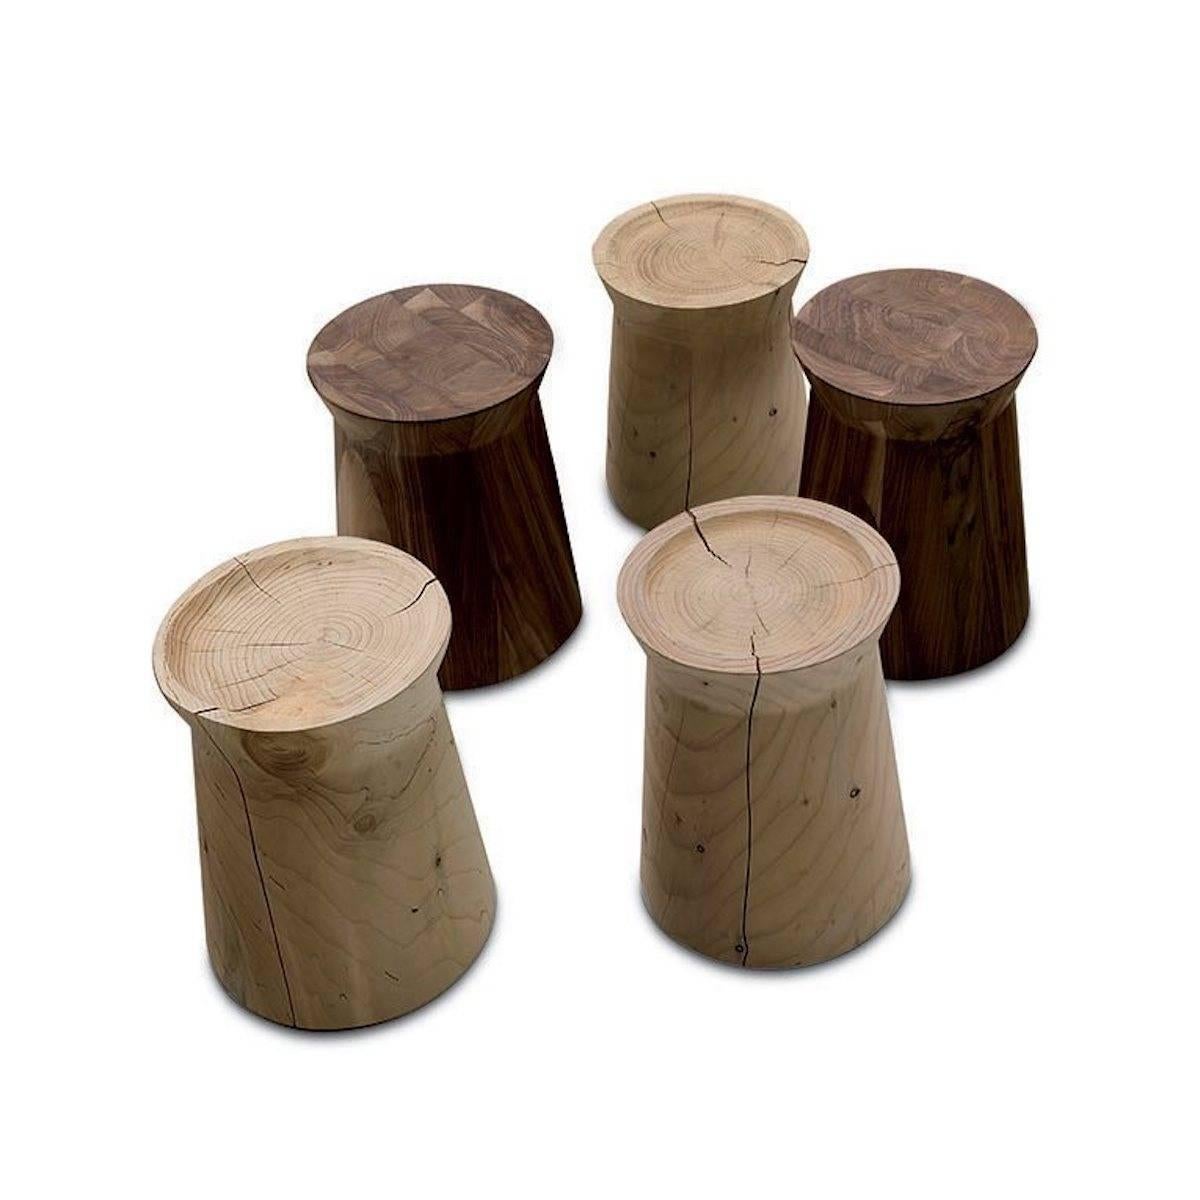 The seamless appearance is the key aesthetical characteristic of this table or stool available in two different finishing’s: Canaletto walnut and cedar wood.

Notes: Splits or cracks of cedar are peculiarities of solid wood products, therefore